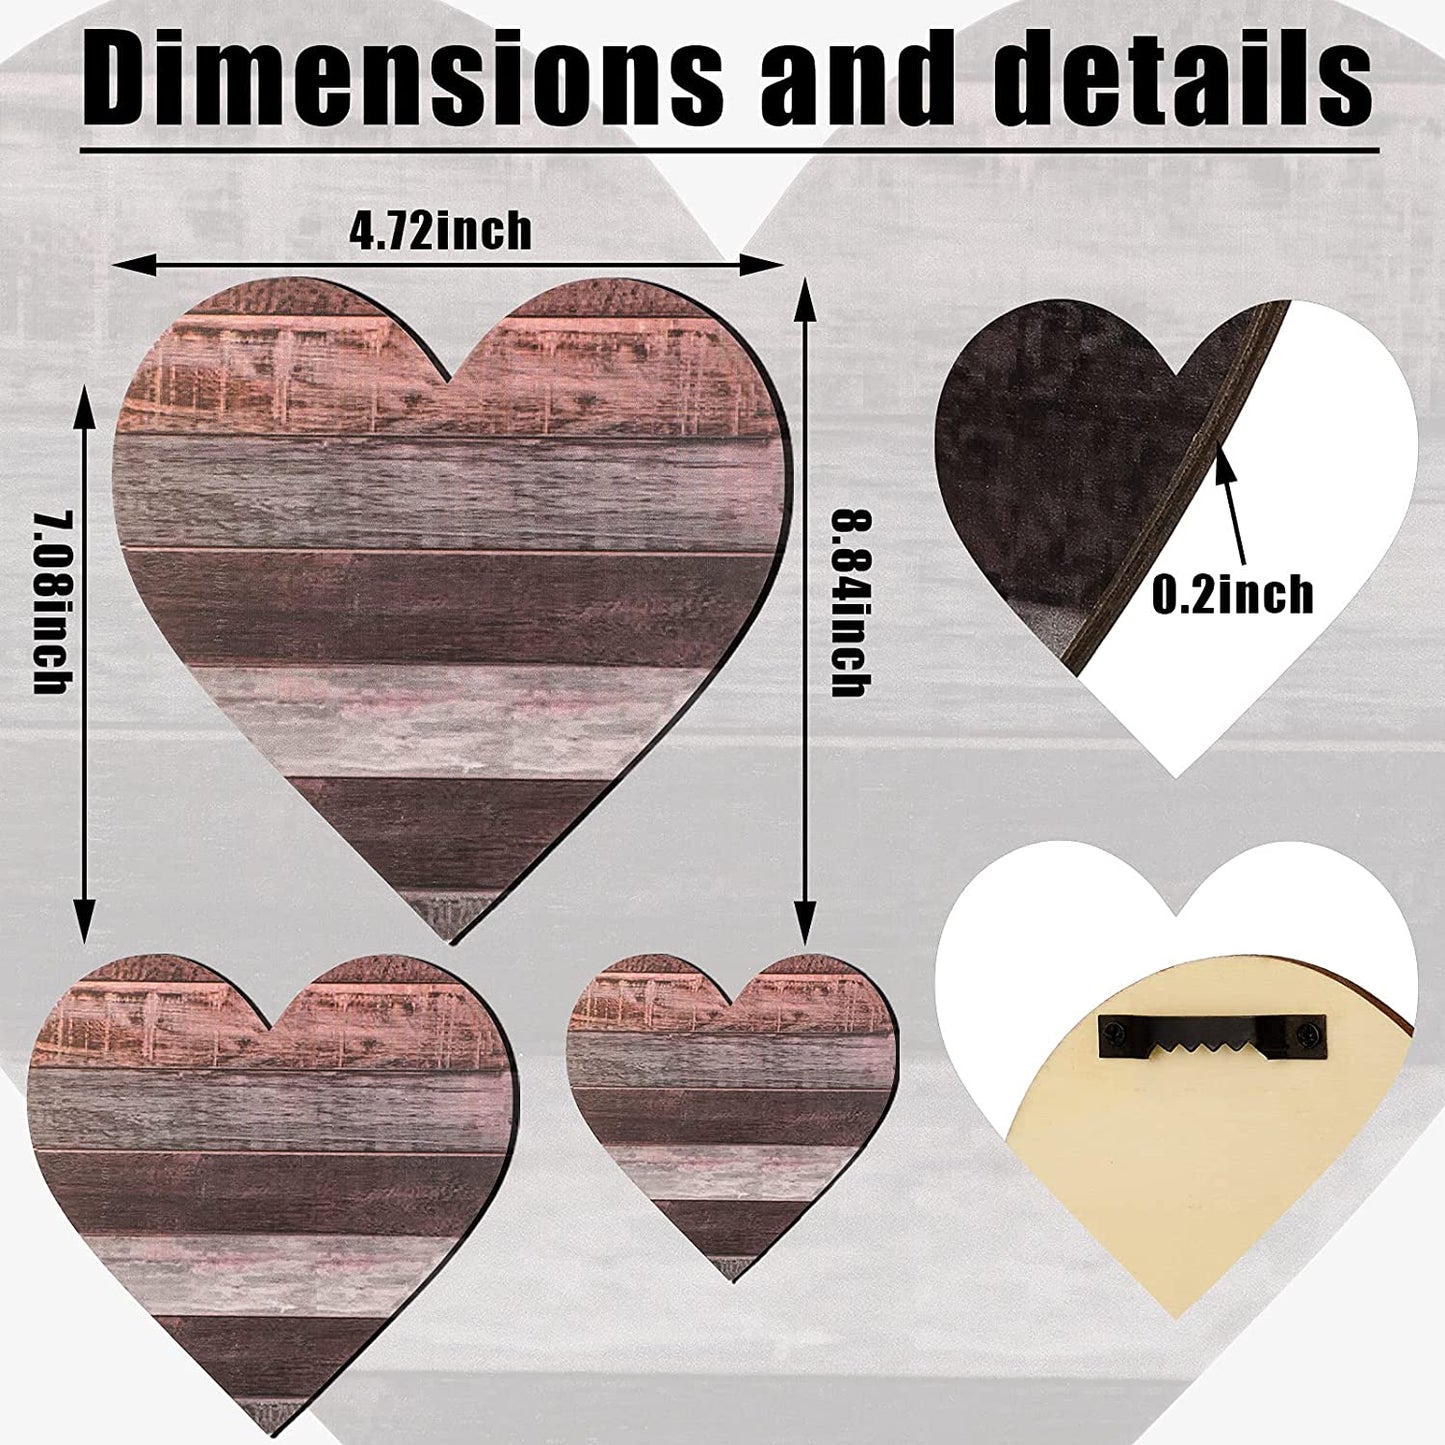 3 Pcs Heart Shaped Wood Sign Buffalo Plaid Decor for Kitchen Bedroom Bathroom Living Room Wooden Heart Wall Sign Rustic Hanging Plaque Christmas Decor, 3 Sizes (Red Brown Wood Grain)